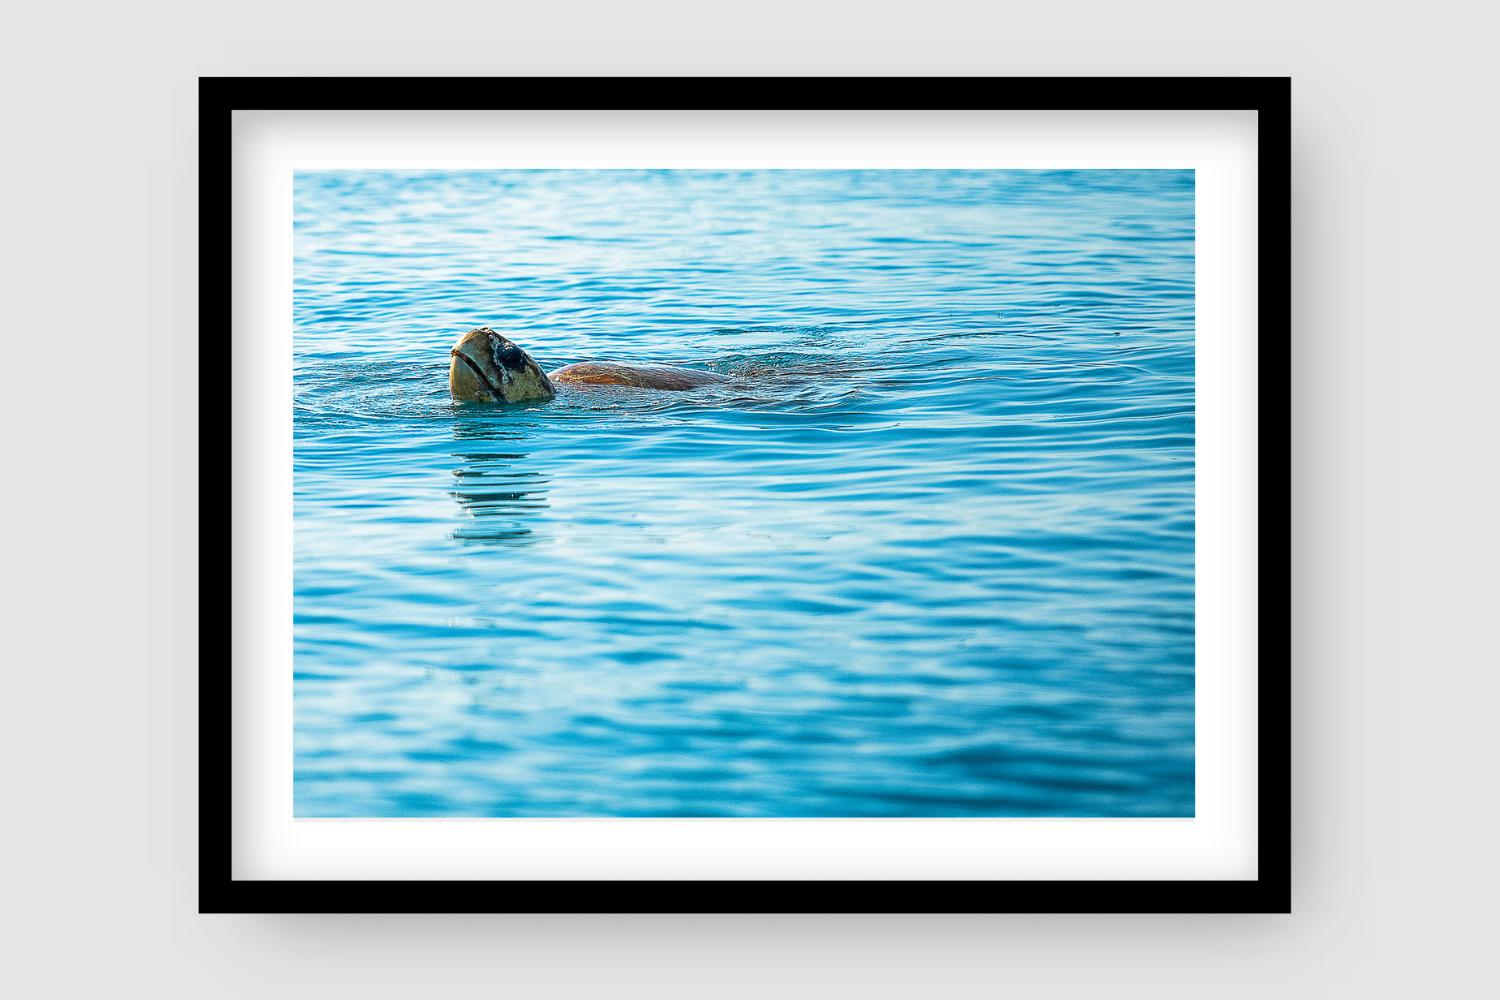 sea turtle poking his head above the water surface